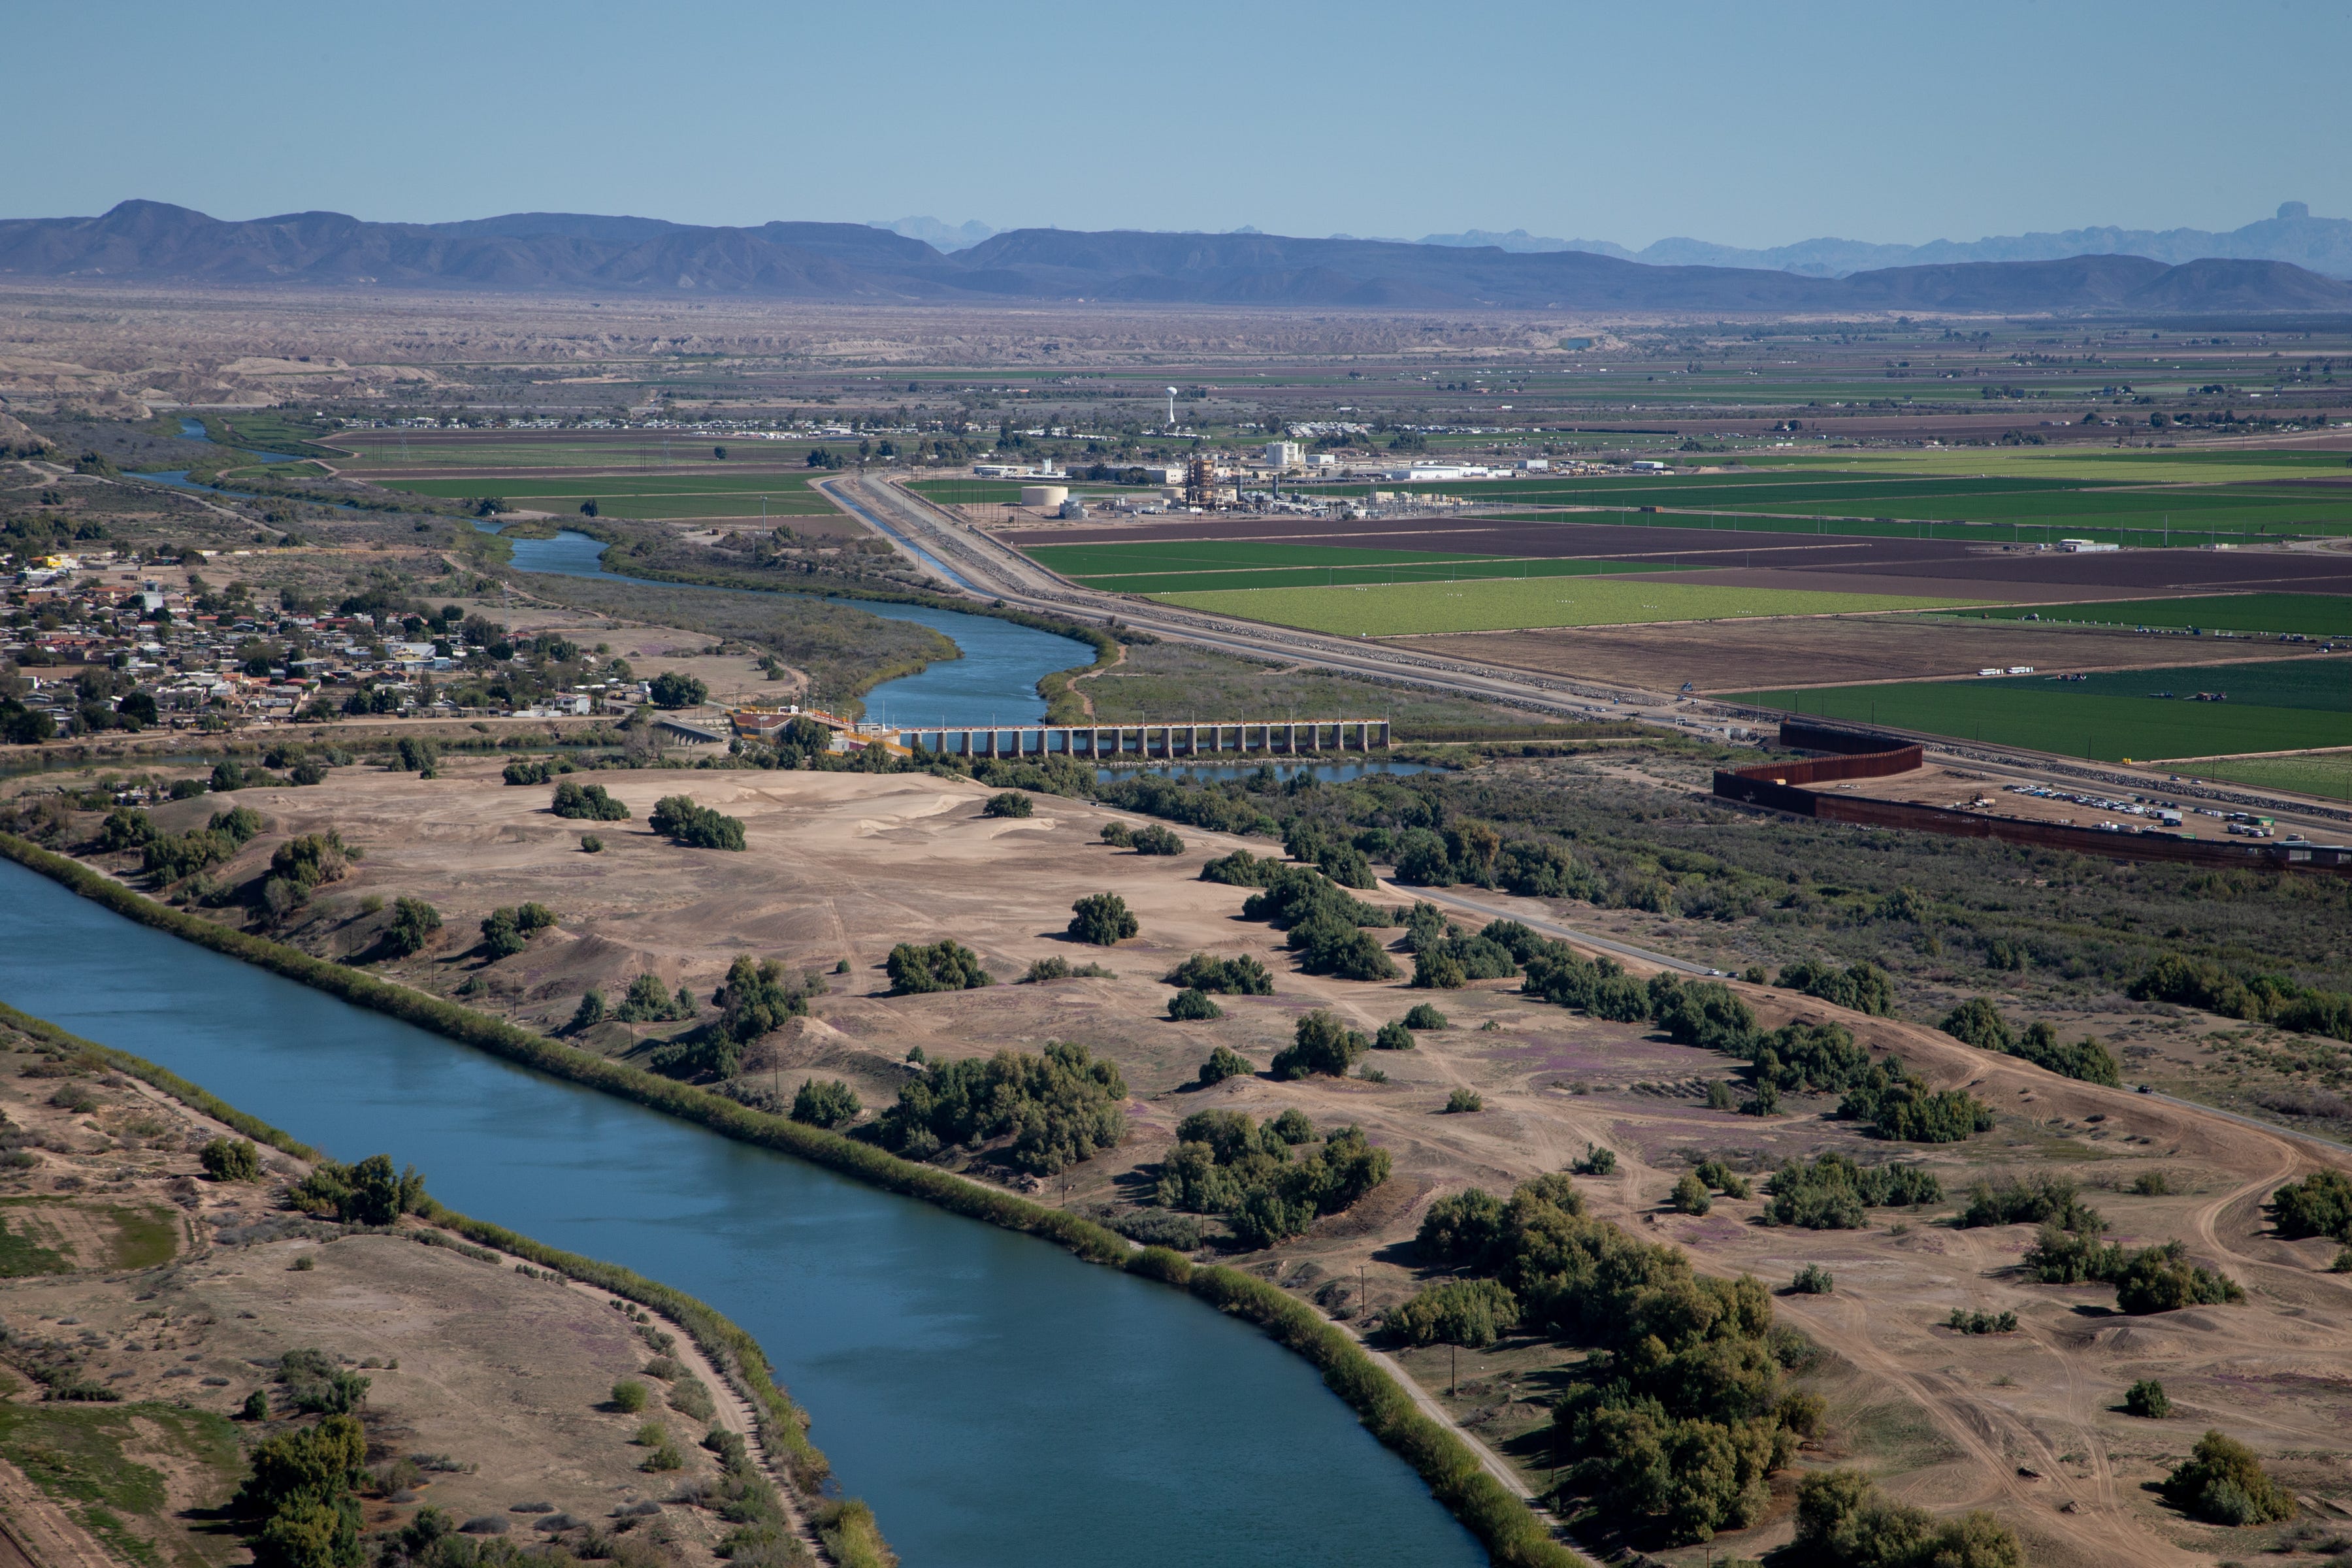 The Colorado River (top center) flows up to Morelos Dam on the U.S.-Mexico border. The Colorado River channel continues next to the border wall (right center), while the Reforma Canal (lower left) carries water to farms and cities in the Mexicali Valley.